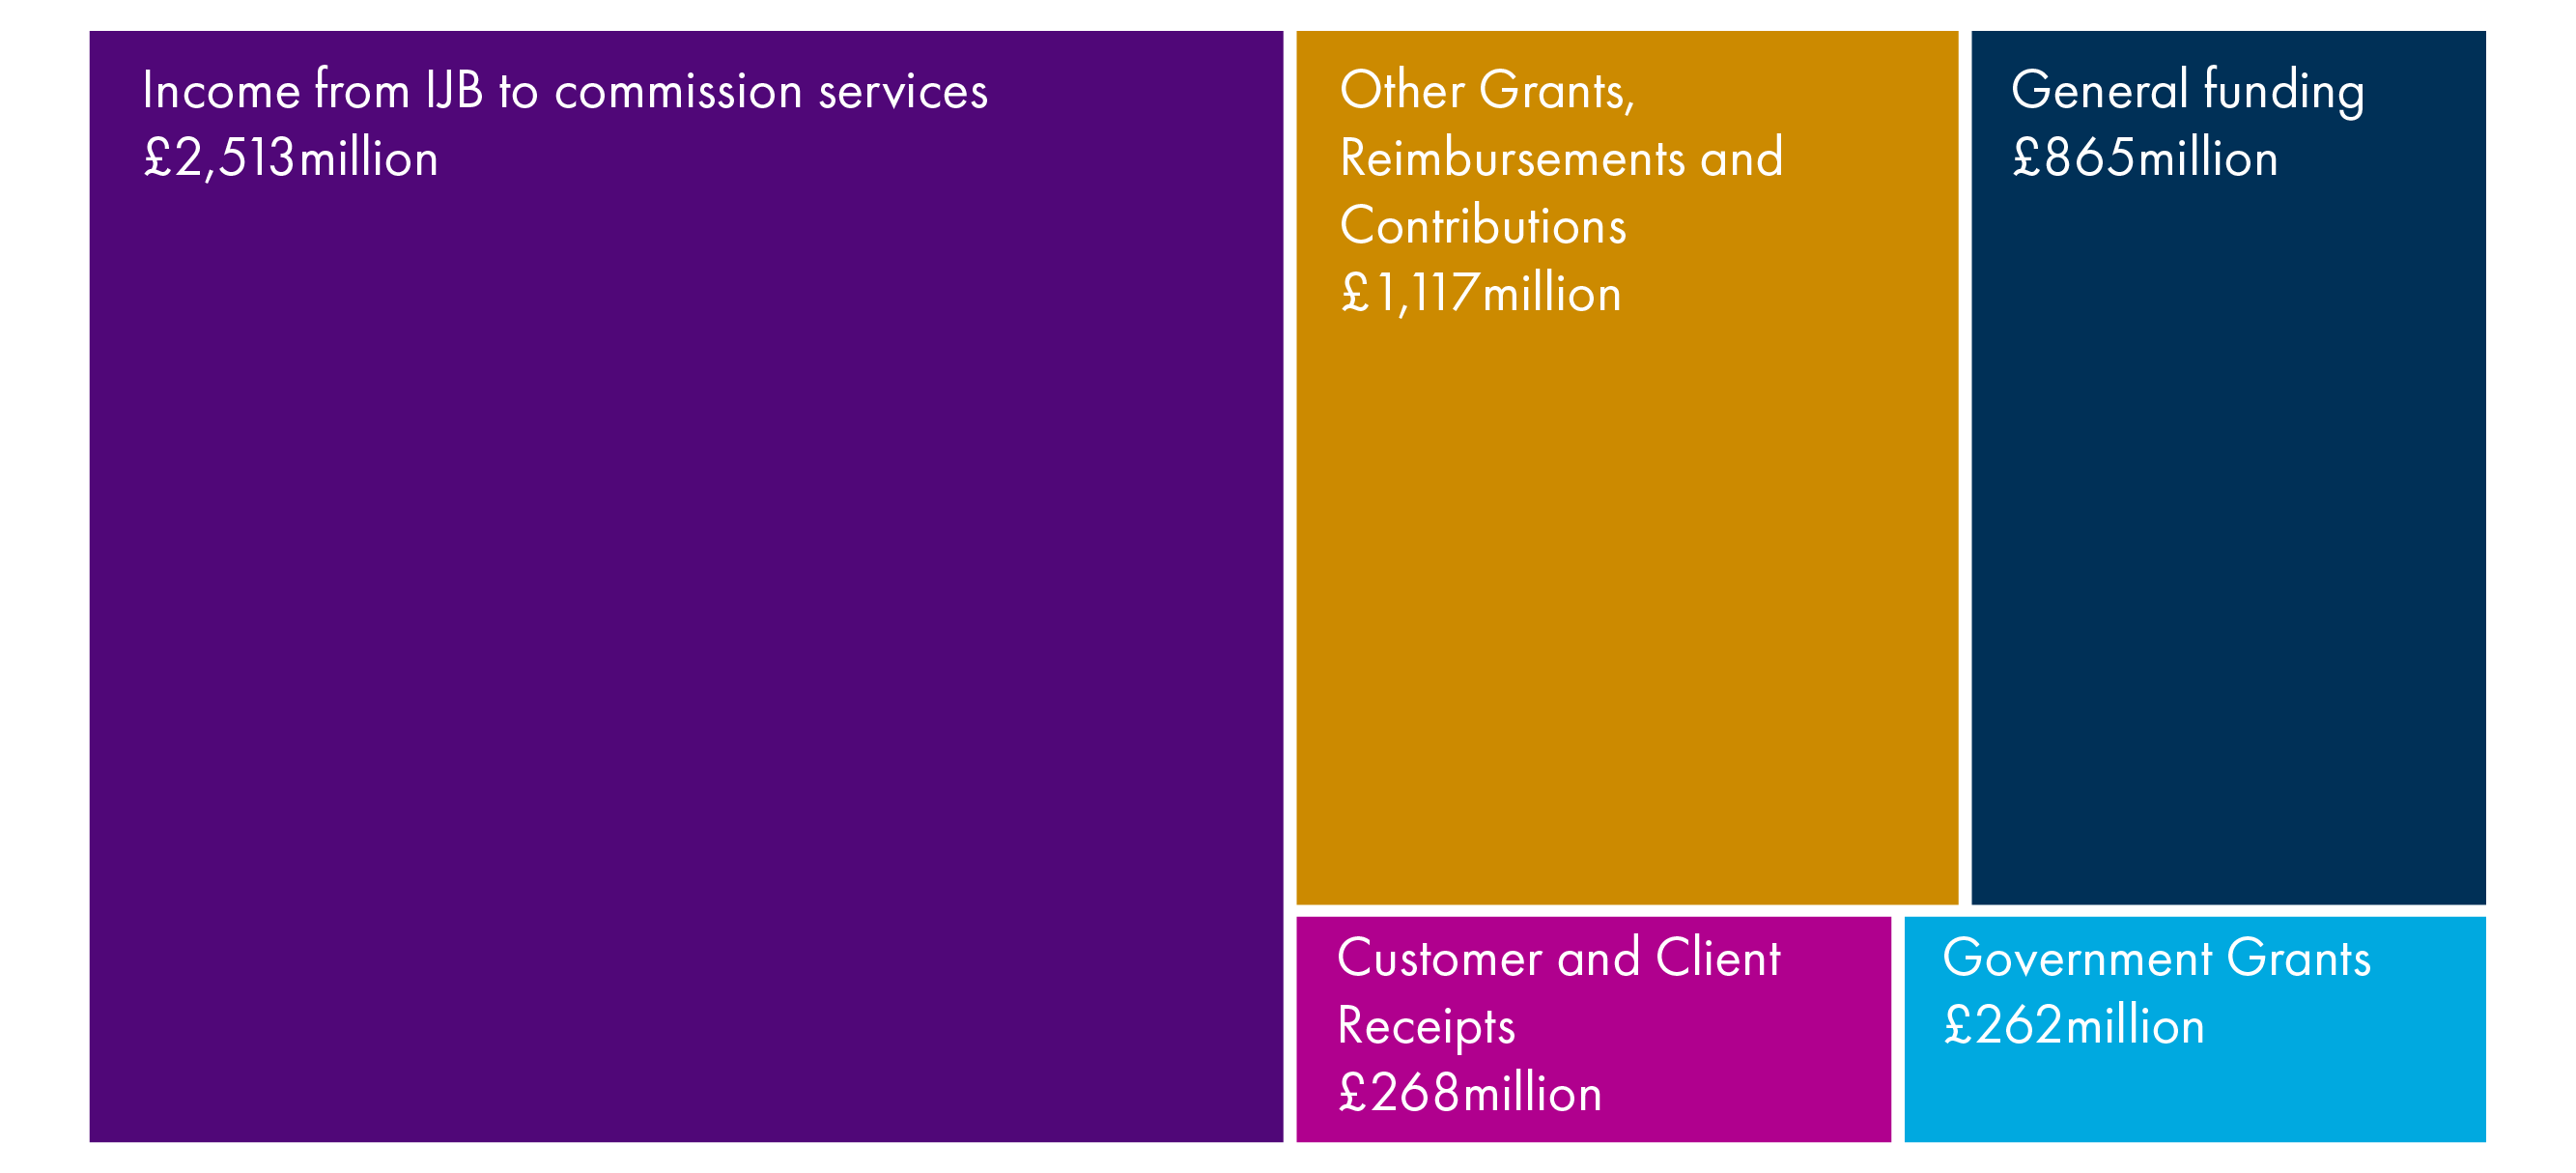 Treemap showing the sources of funding for social work services